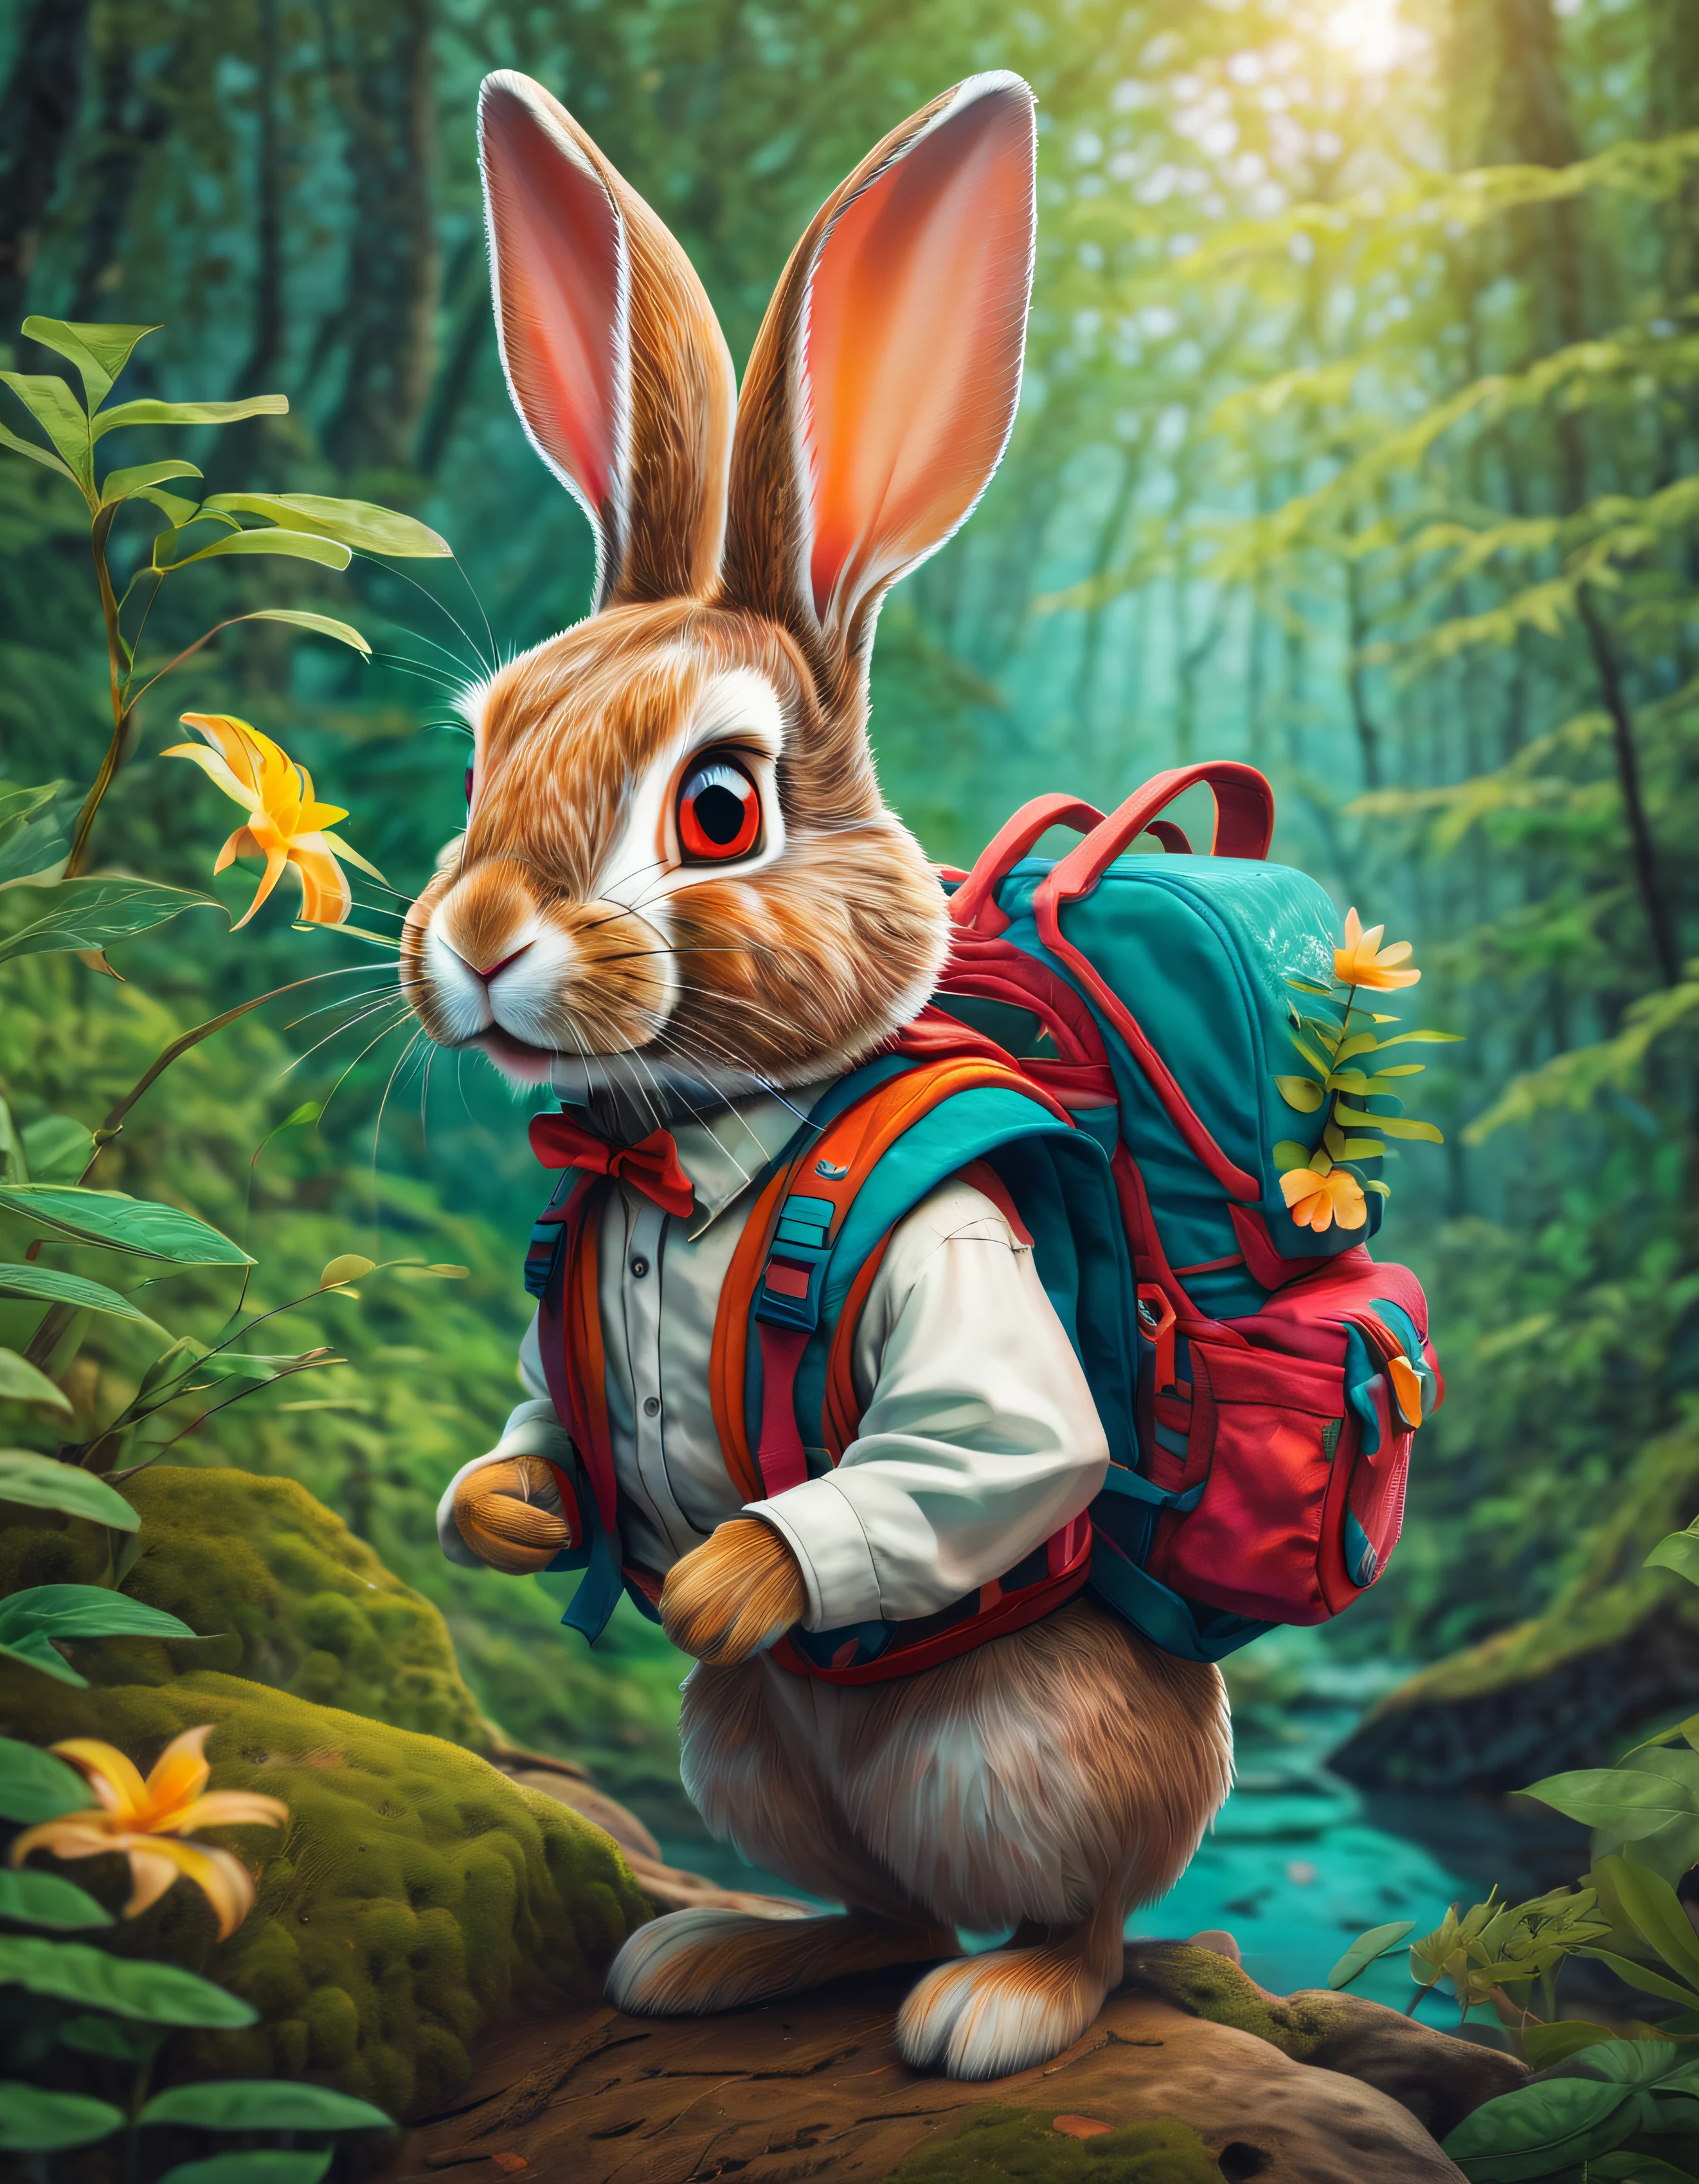 An adventurous rabbit，Comes with a backpack and binoculars, Explore diverse natural habitats. This piece shows the rabbit's curiosity and love for nature, Because it is immersed in different ecosystems. The use of vibrant colors and intricate details adds depth and visual interest to the artwork, Evoke awe and appreciation for the beauty of the natural world. Created by renowned digital artist James Gurney